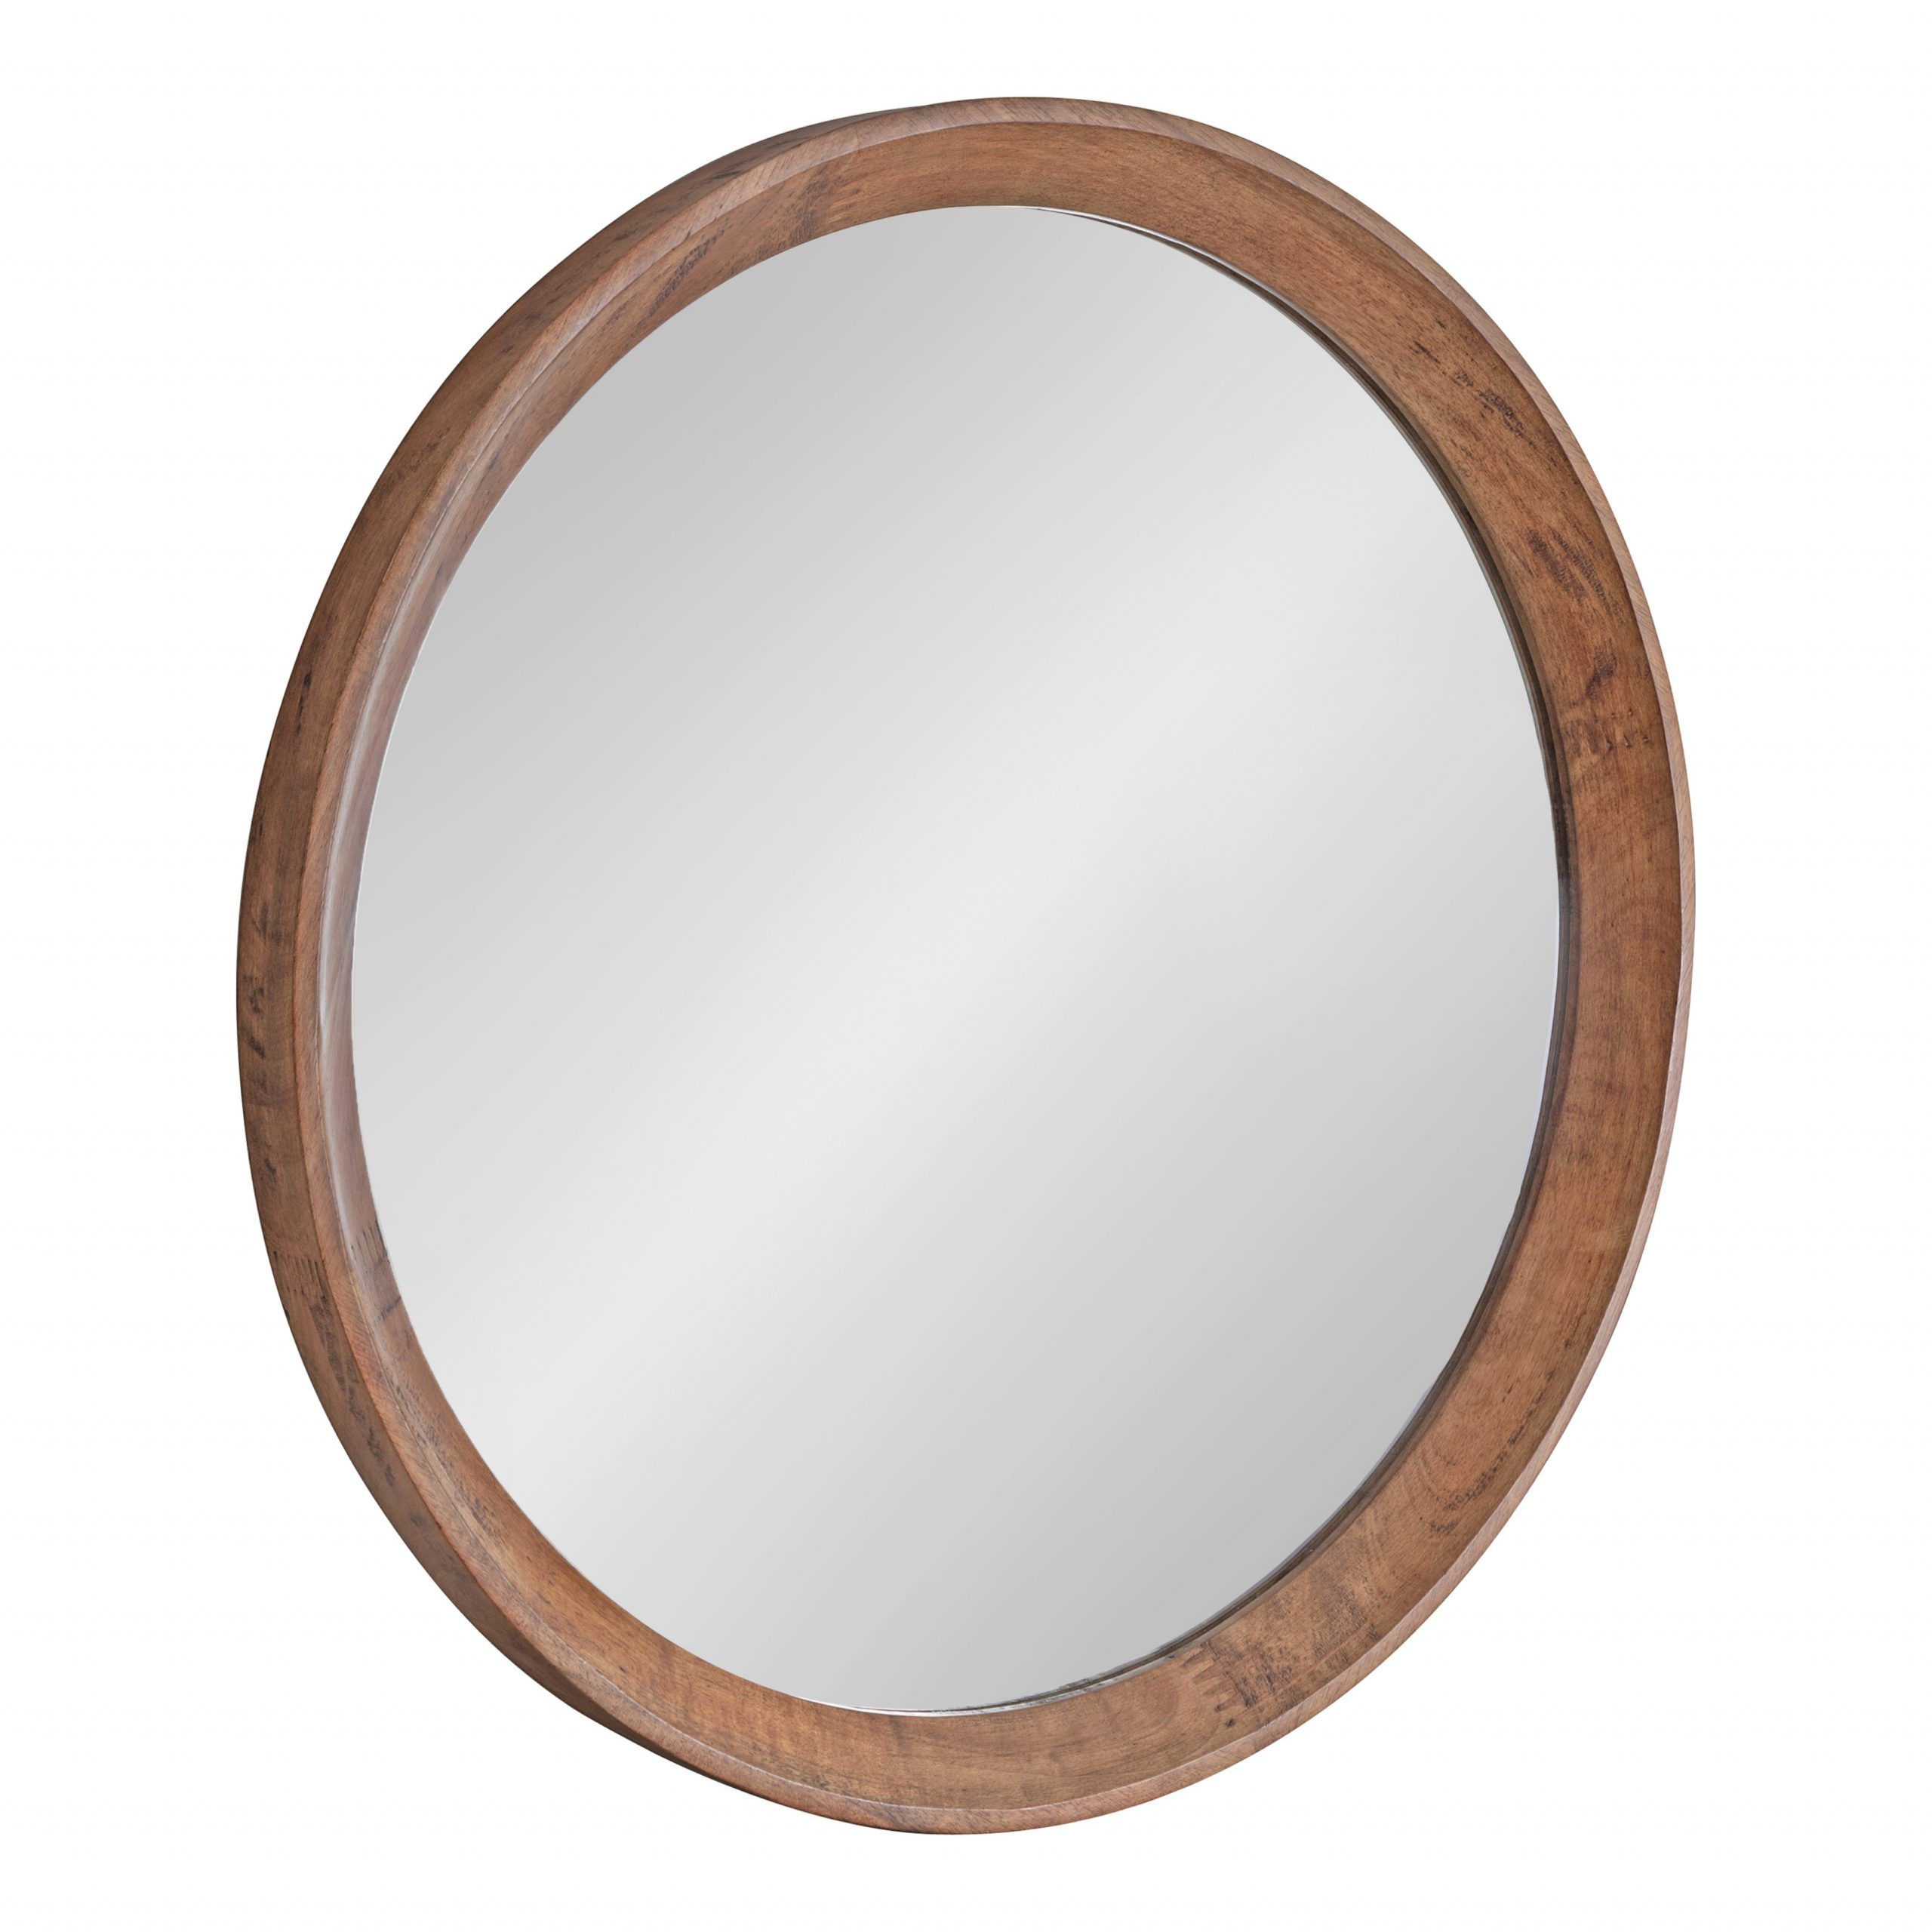 Kate And Laurel Hartman Transitional Round Wood Framed Wall Mirror, 30 Intended For Medium Brown Wood Wall Mirrors (View 12 of 15)